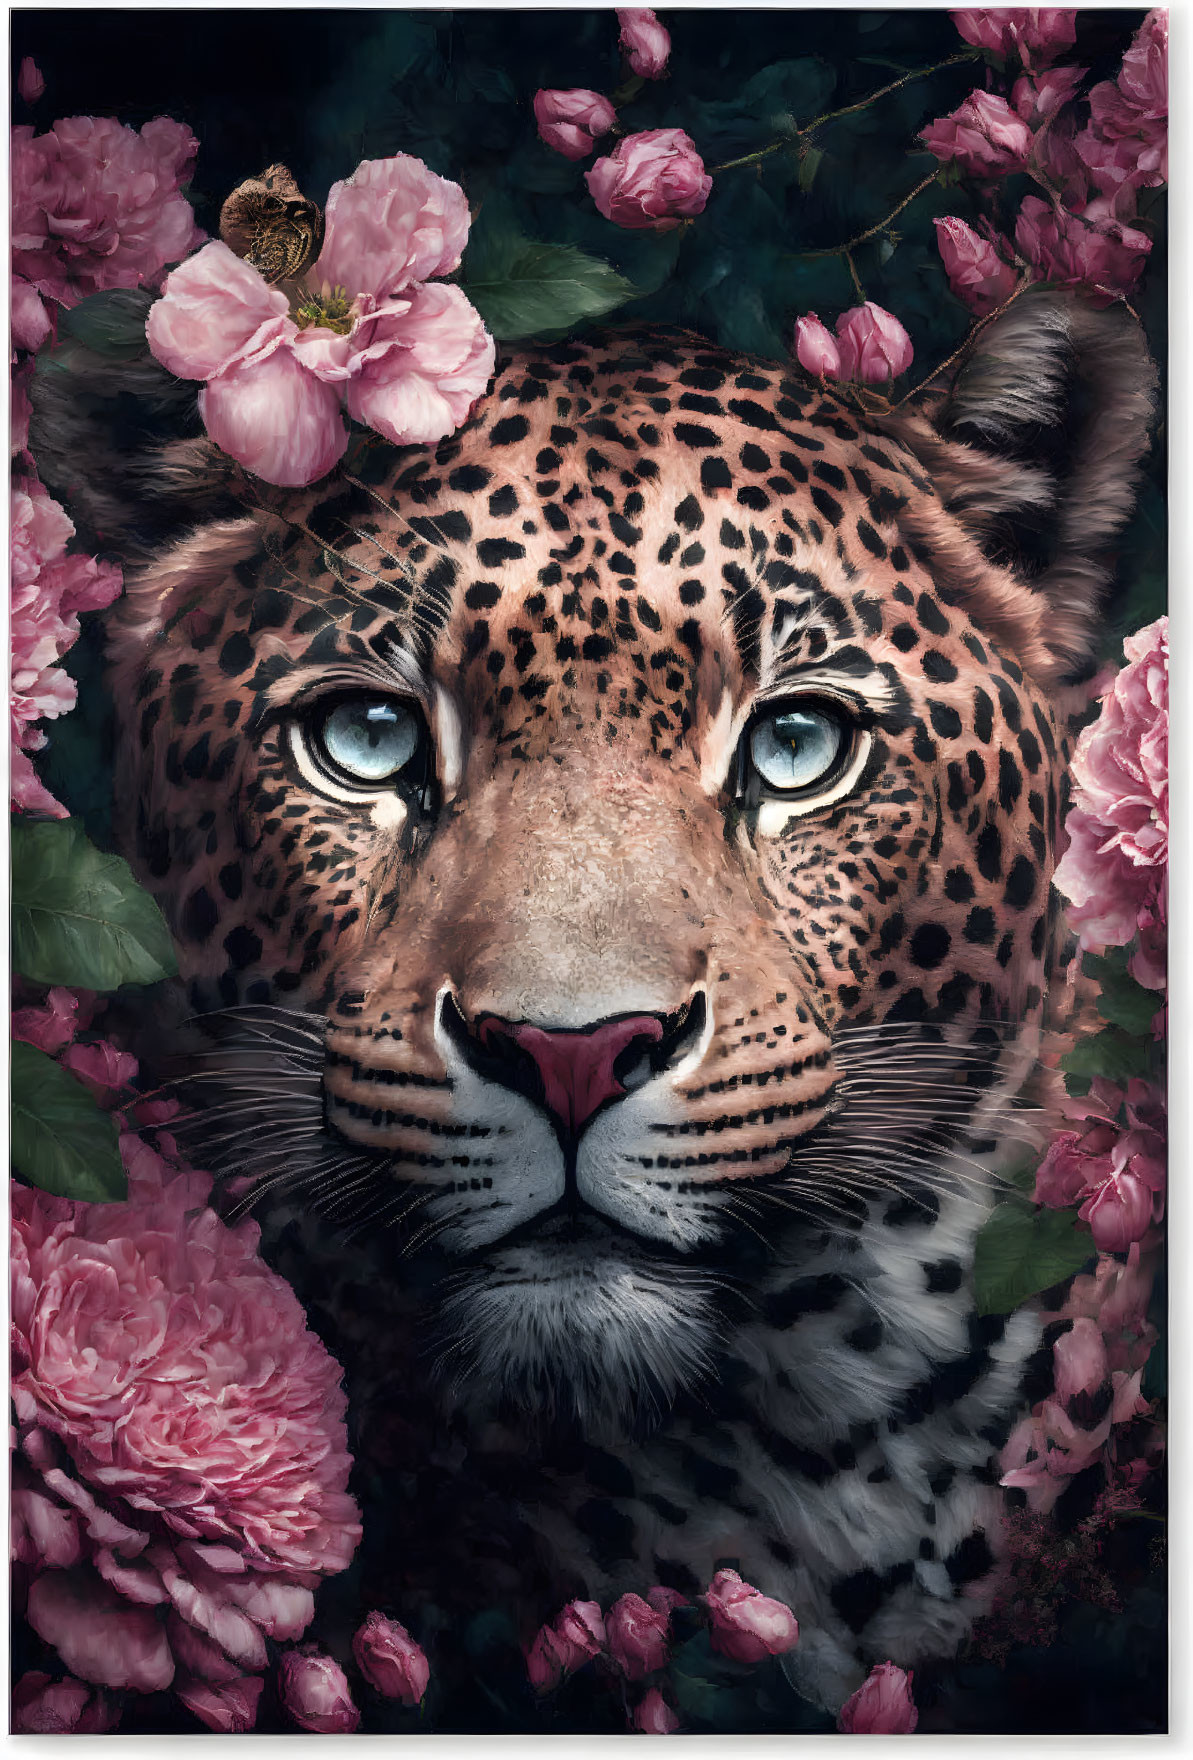 Detailed Jaguar Face Surrounded by Pink Peonies and Butterfly